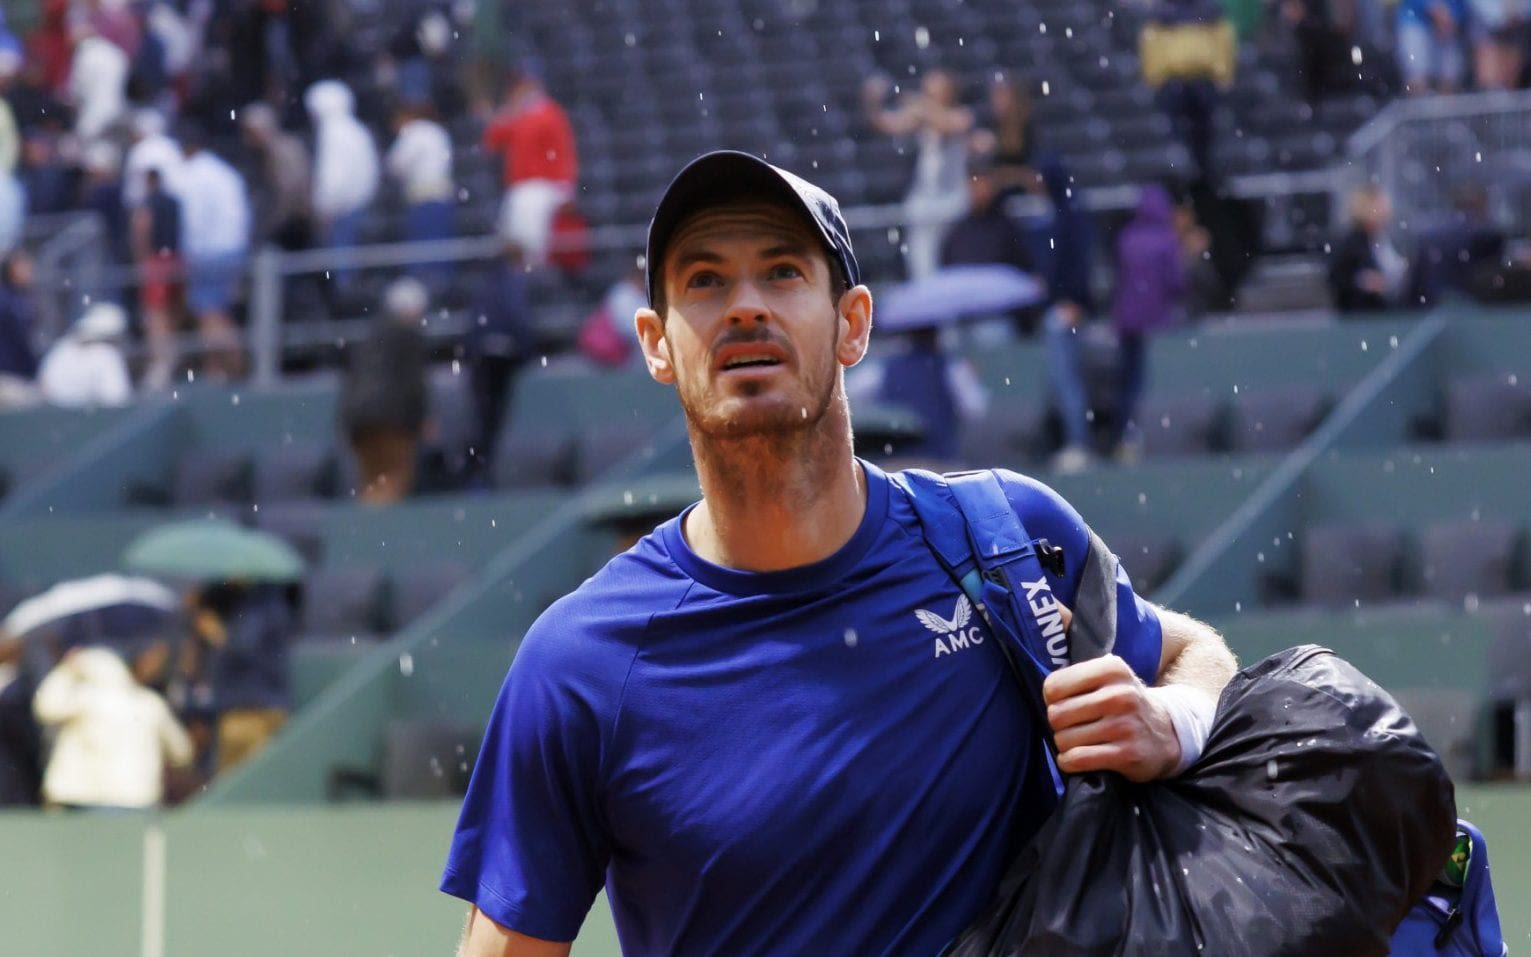 Andy Murray distracted by bizarre weather as he heads for defeat on ATP return